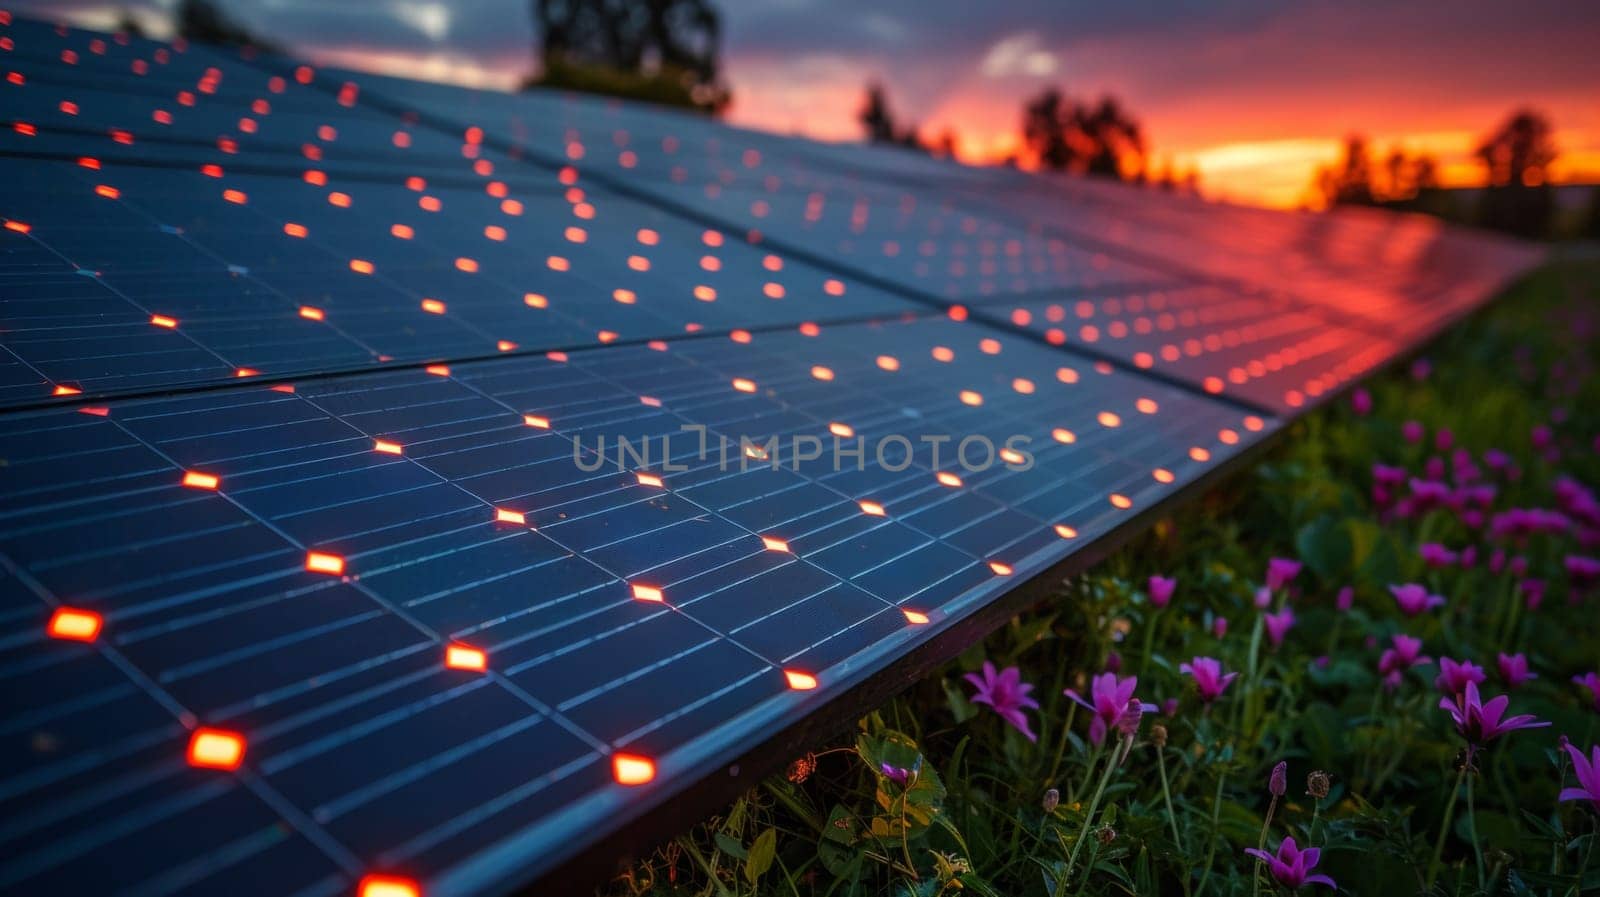 A row of solar panels with lights on them in the sunset, AI by starush